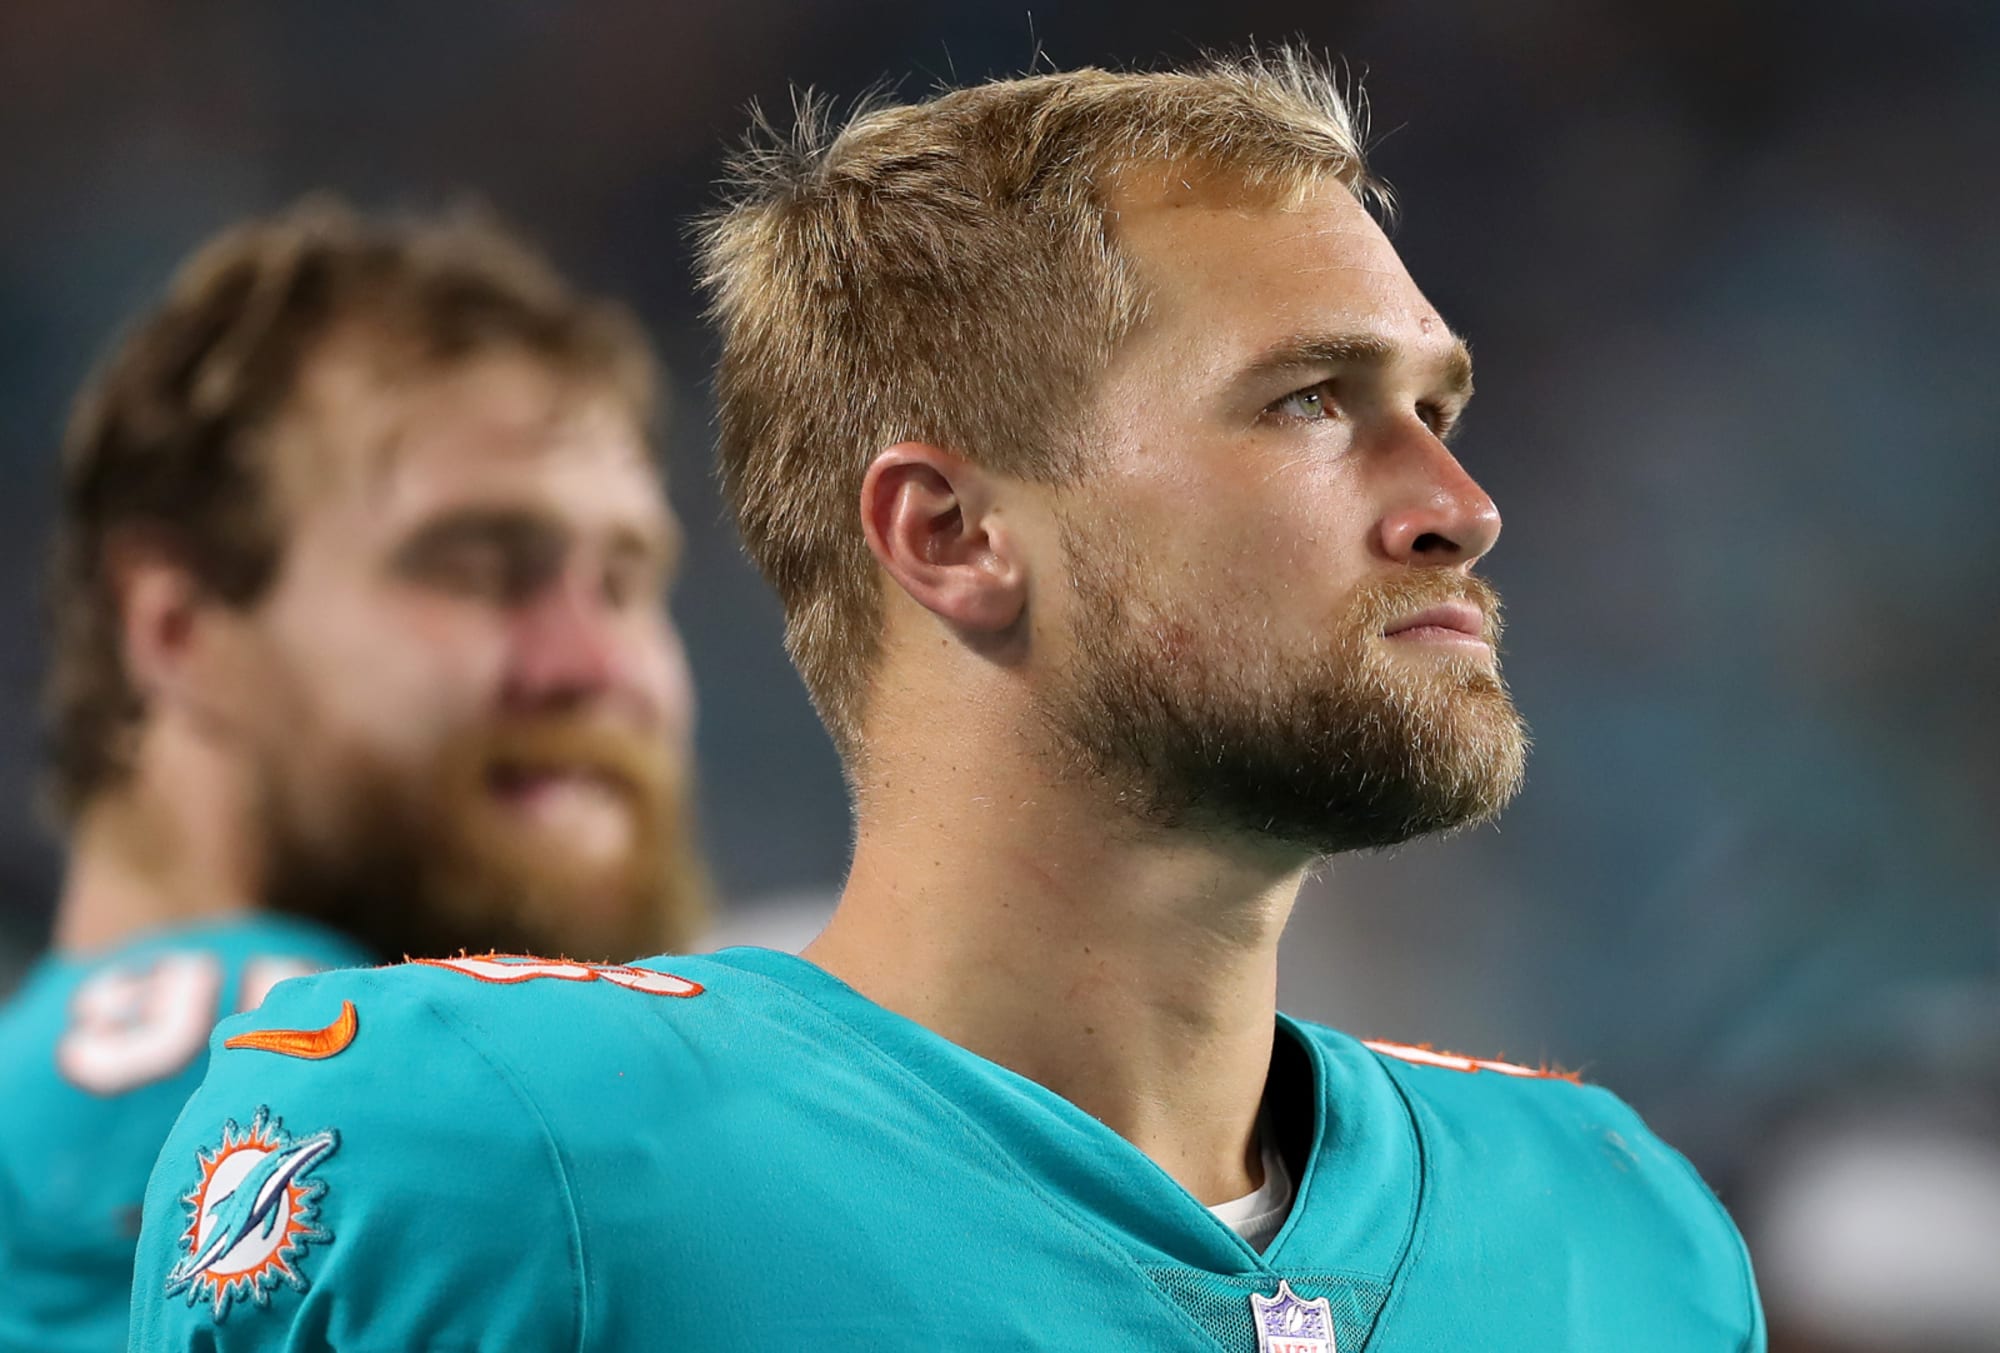 Troubling signs indicate Mike Gesicki is on the way out of Miami